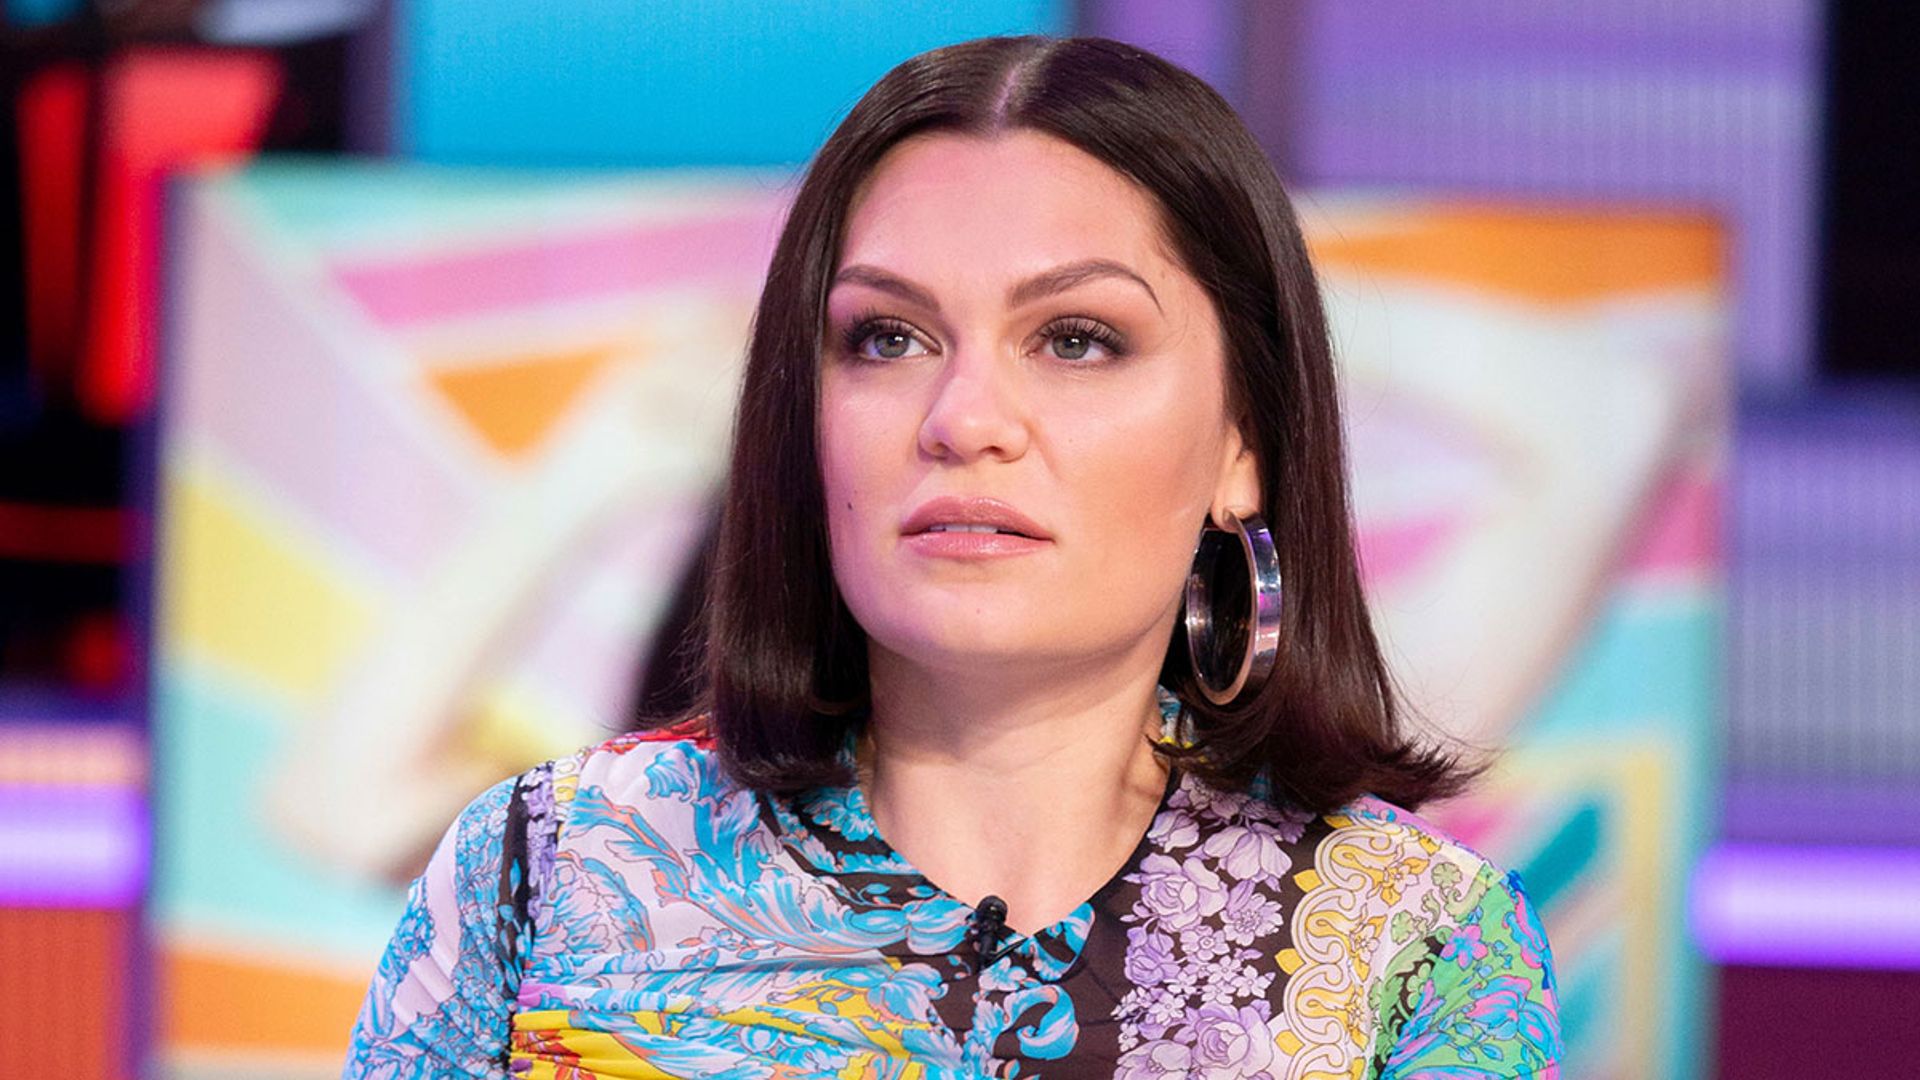 Jessie J suffers miscarriage after deciding to “have a baby on my own”